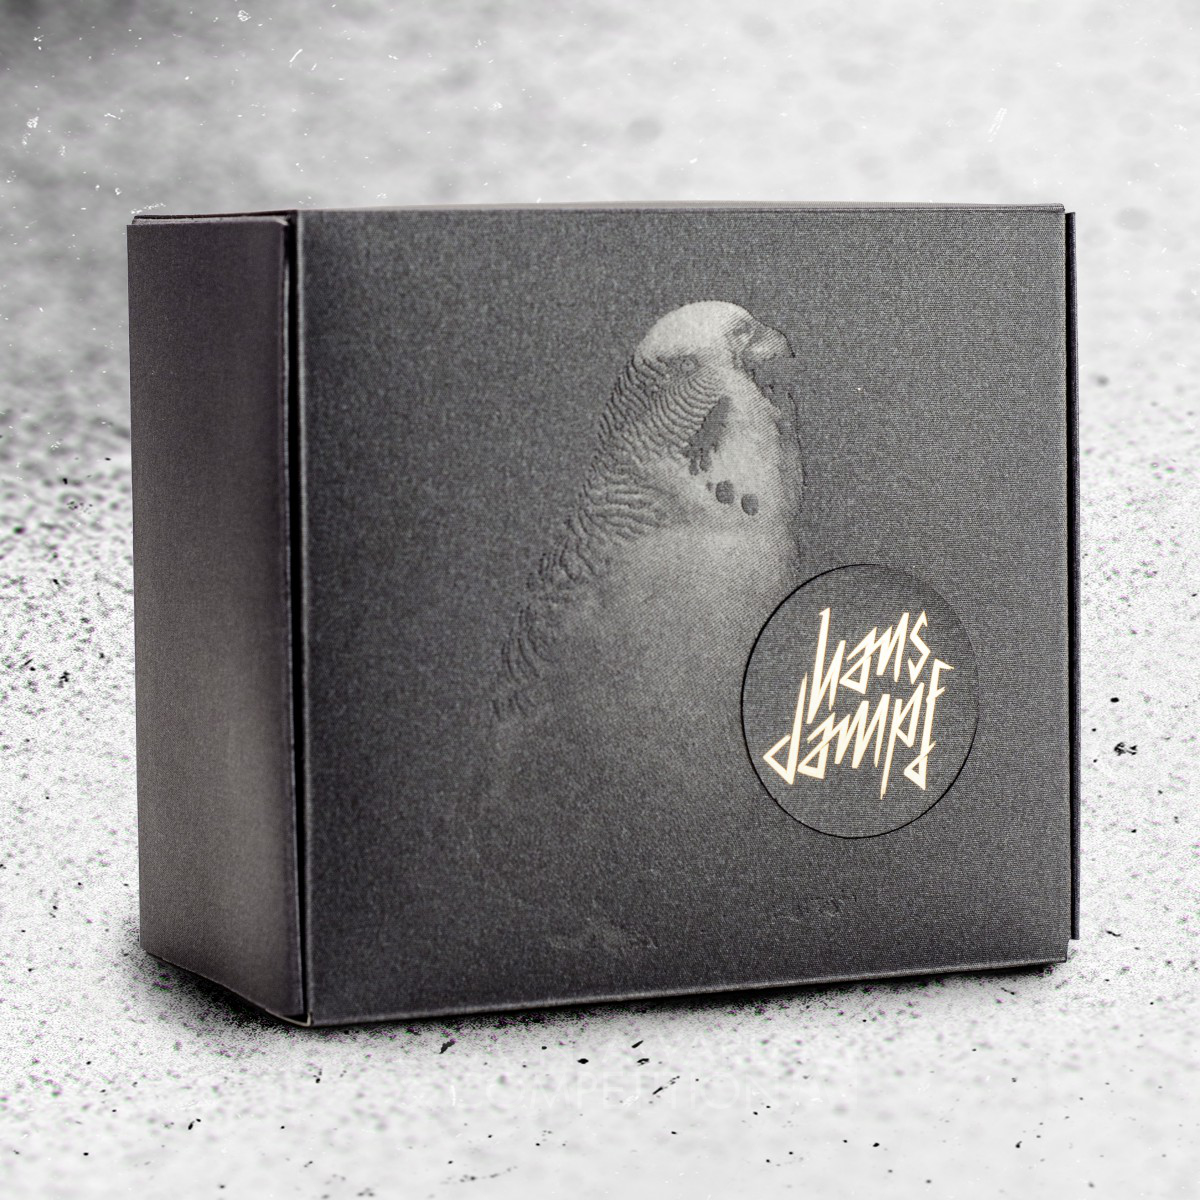 Hans Dampf CD Packaging by Andreas Welter